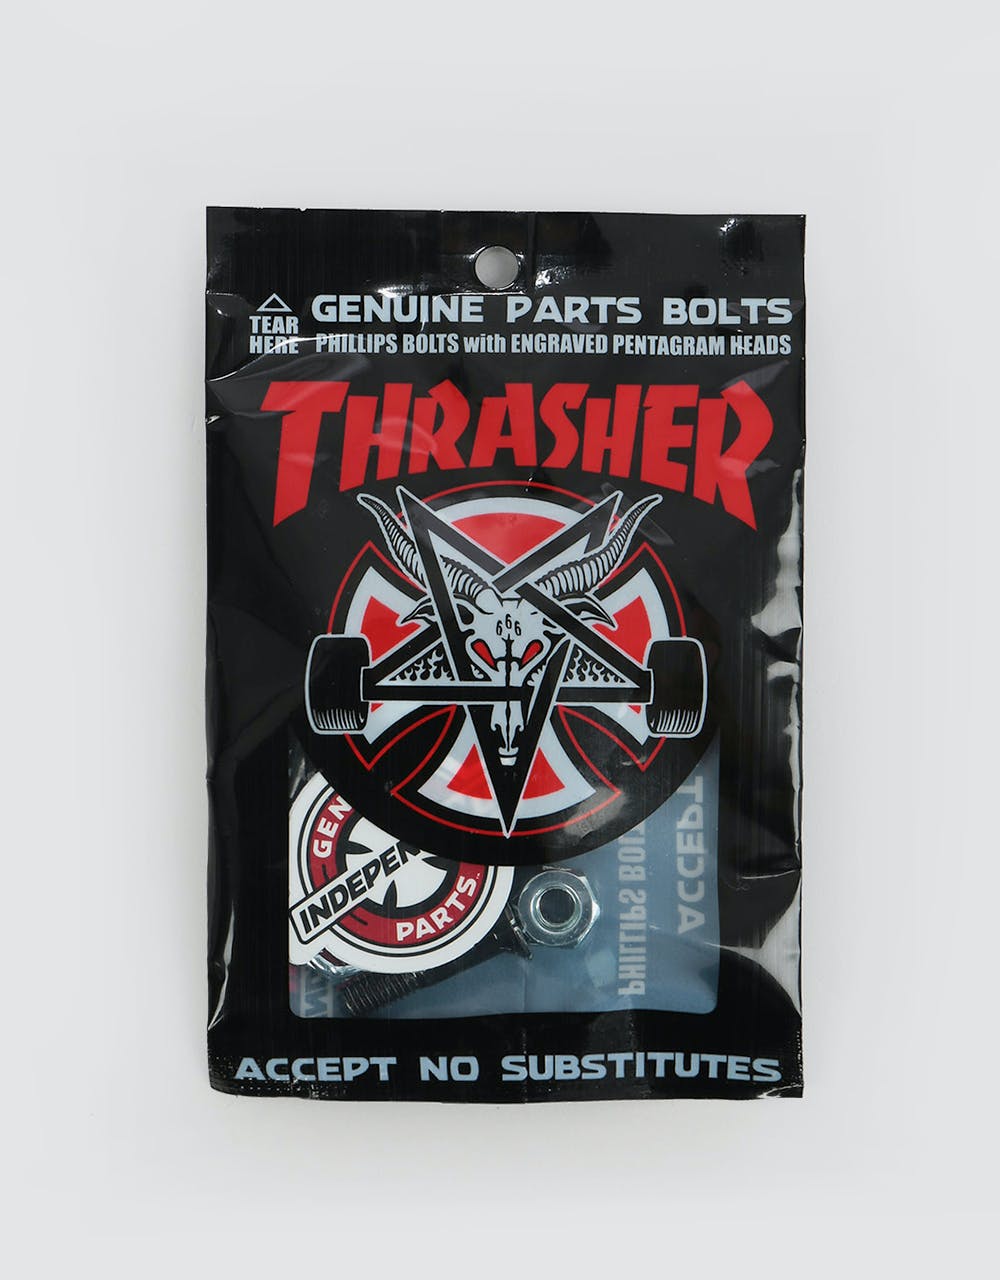 Independent x Thrasher 7/8" Phillips Bolts